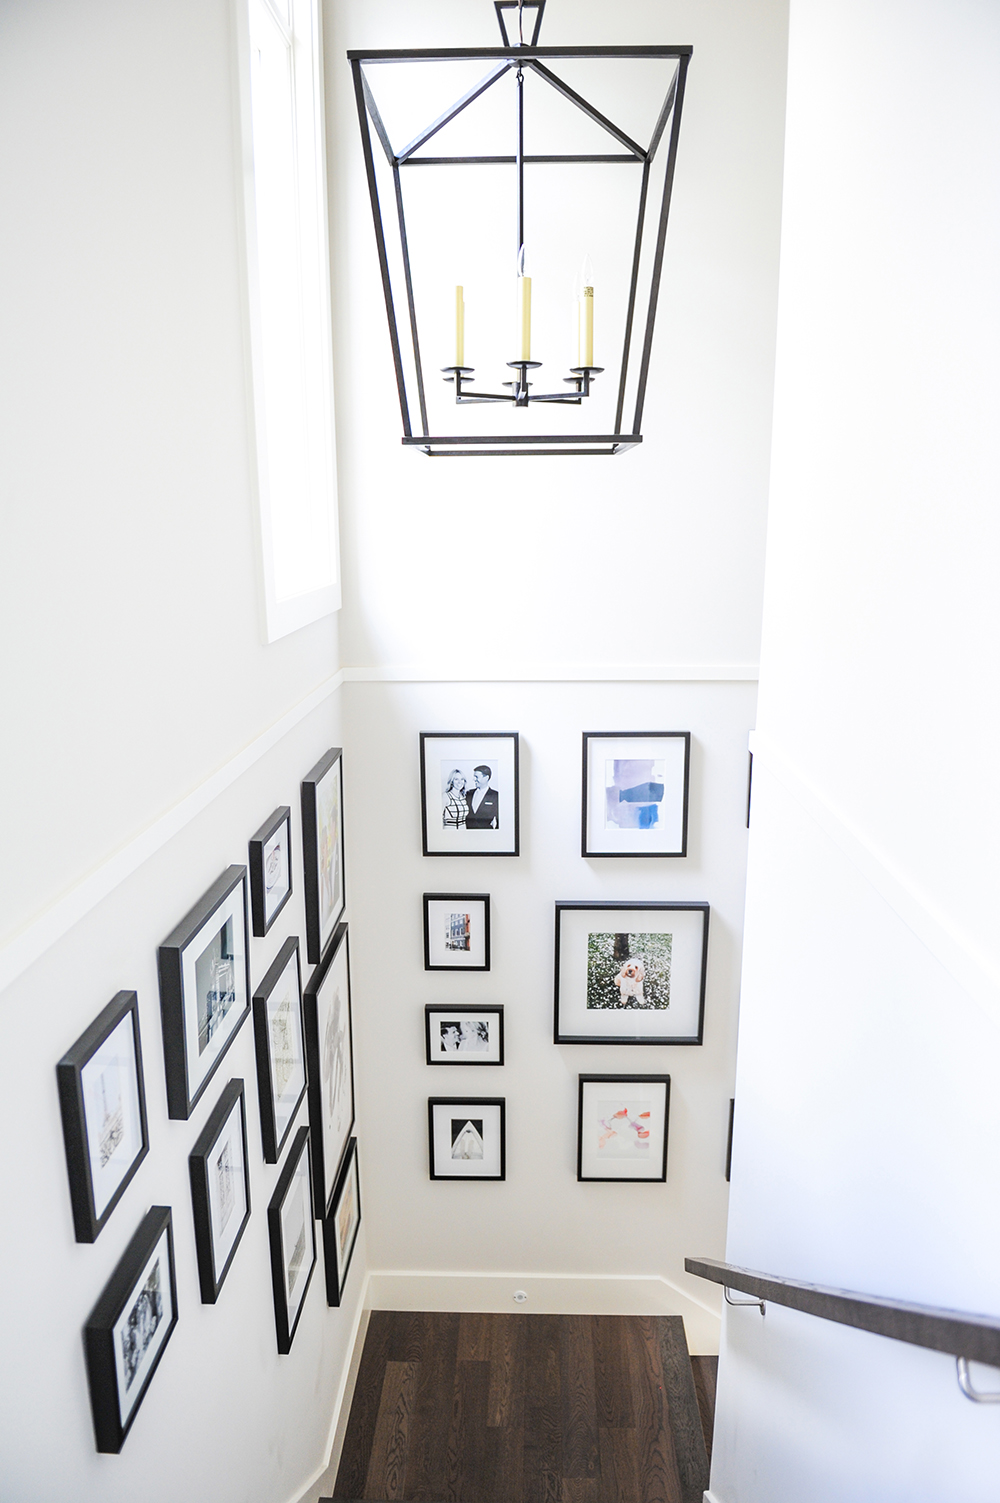 A gallery wall needn't be expensive or reserved for formal artwork.